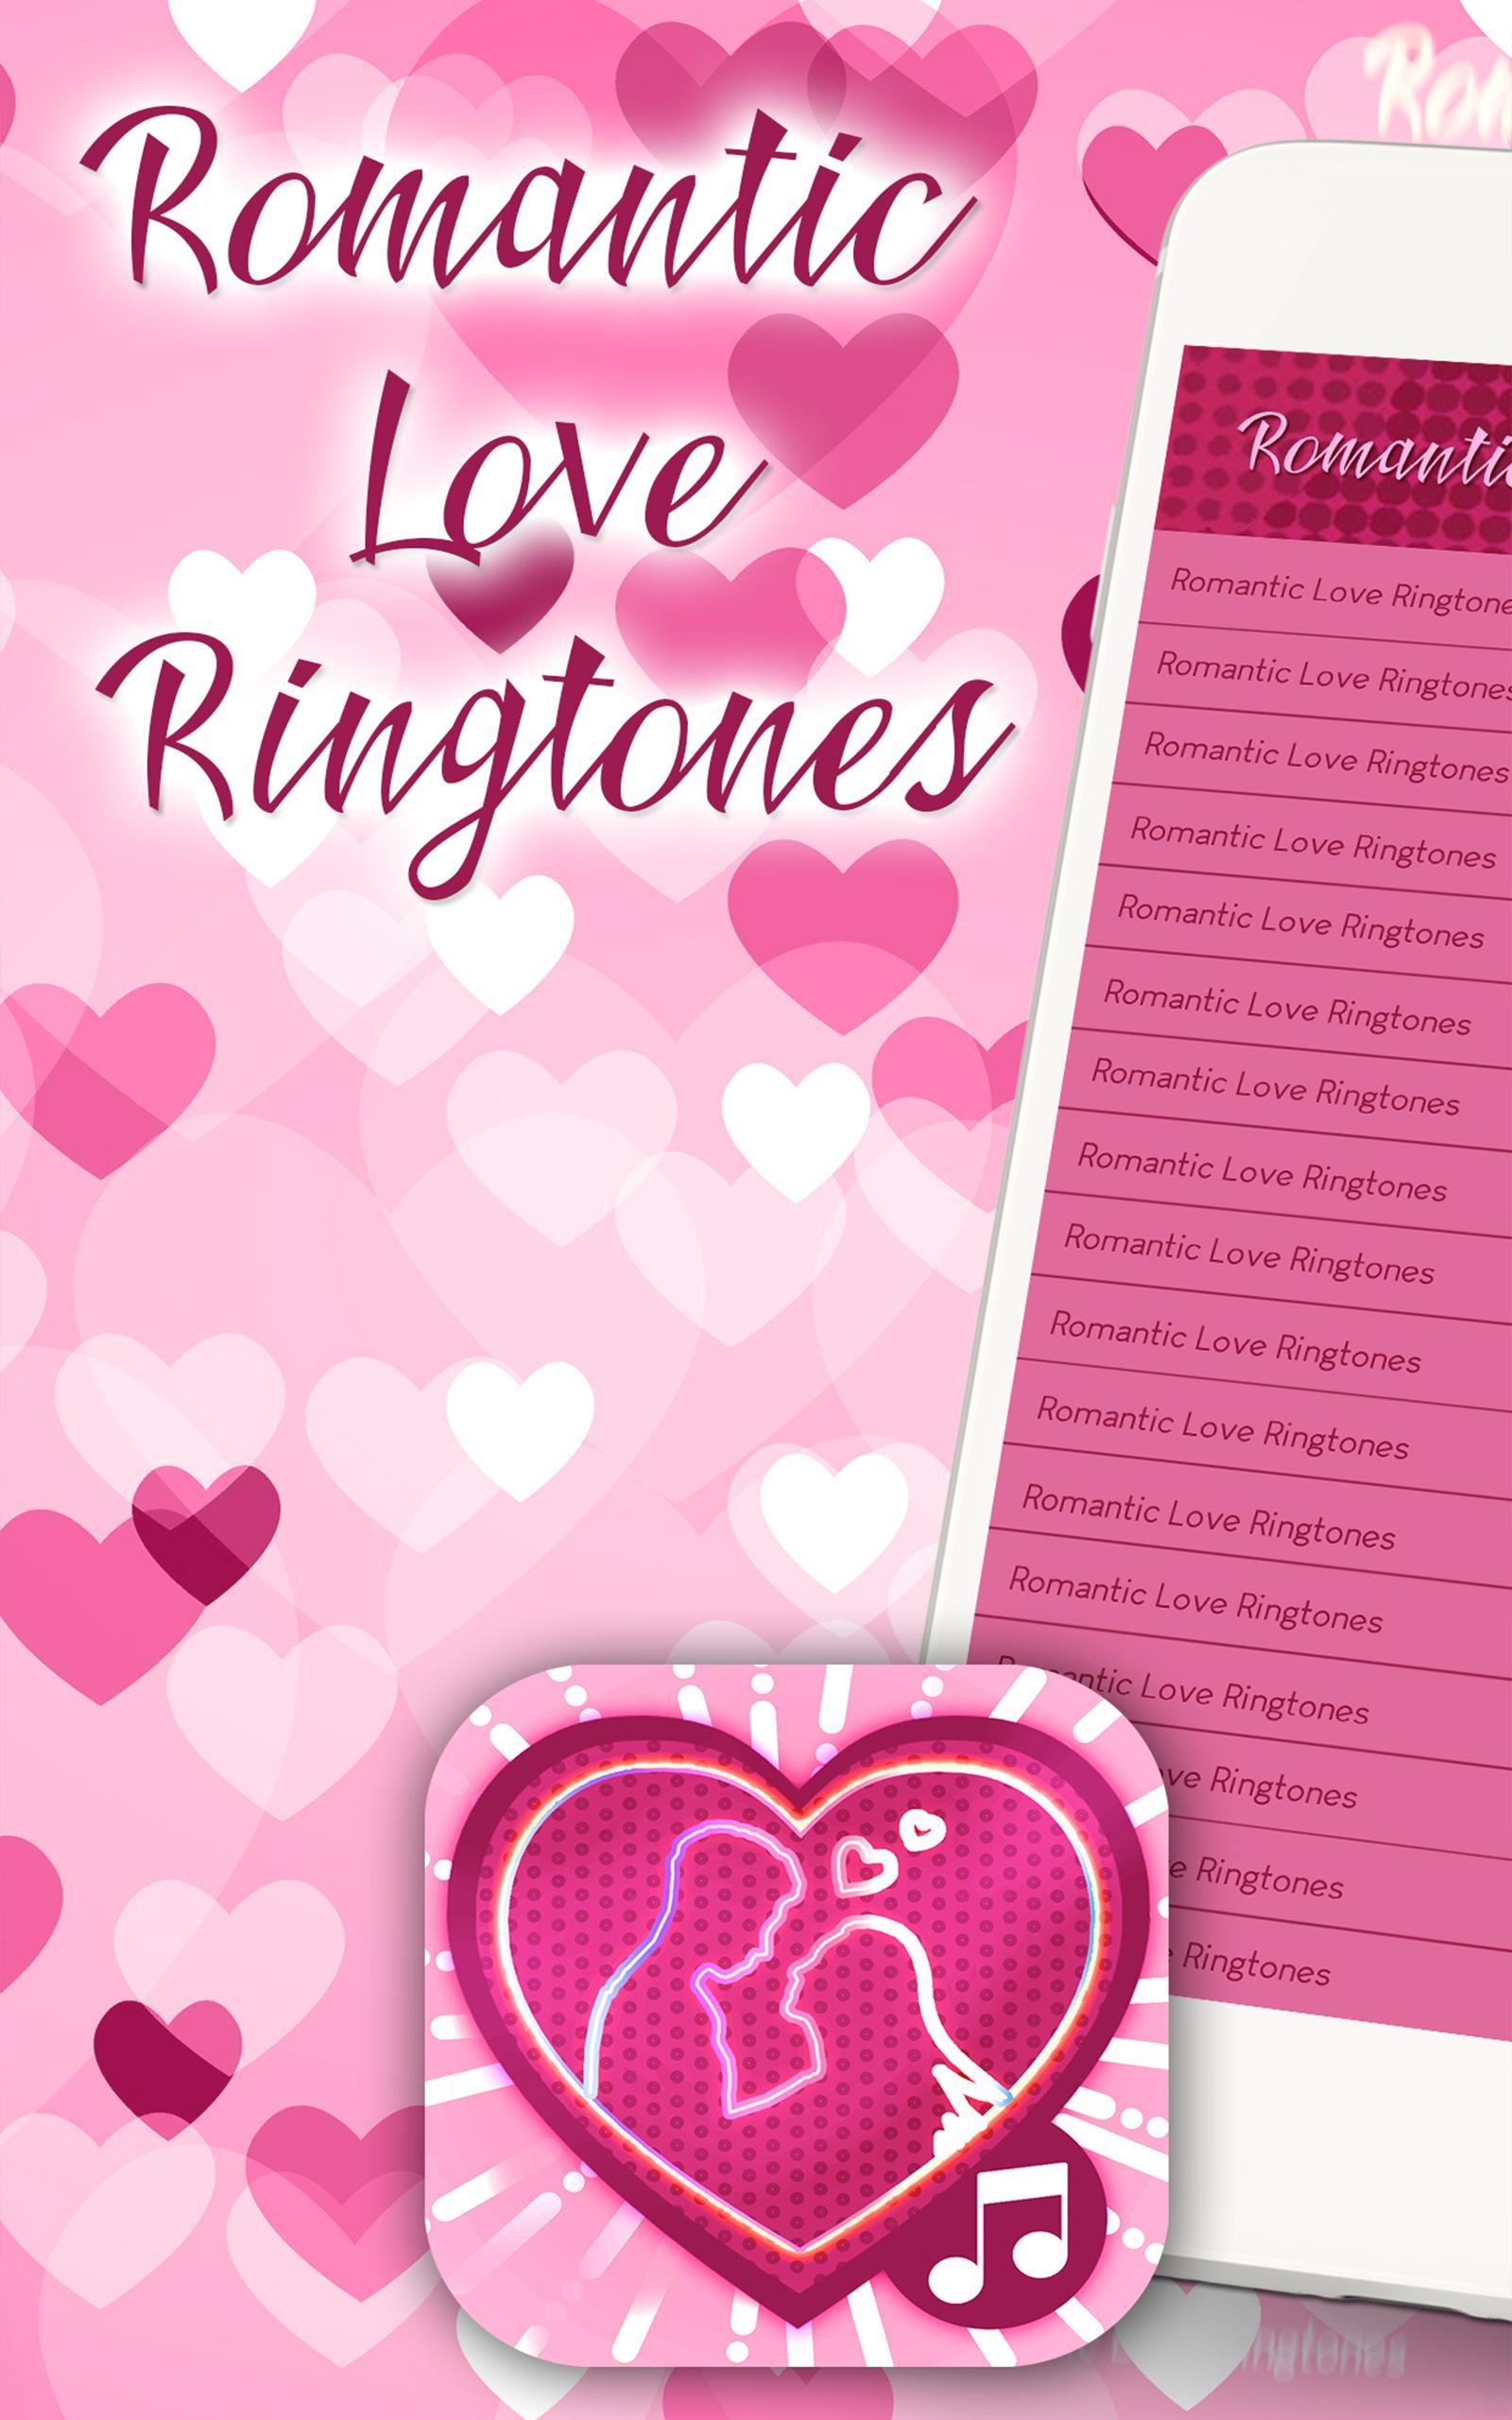 Romantic Ringtones 2019 2020 Love Song Ringtone For Android Apk Download